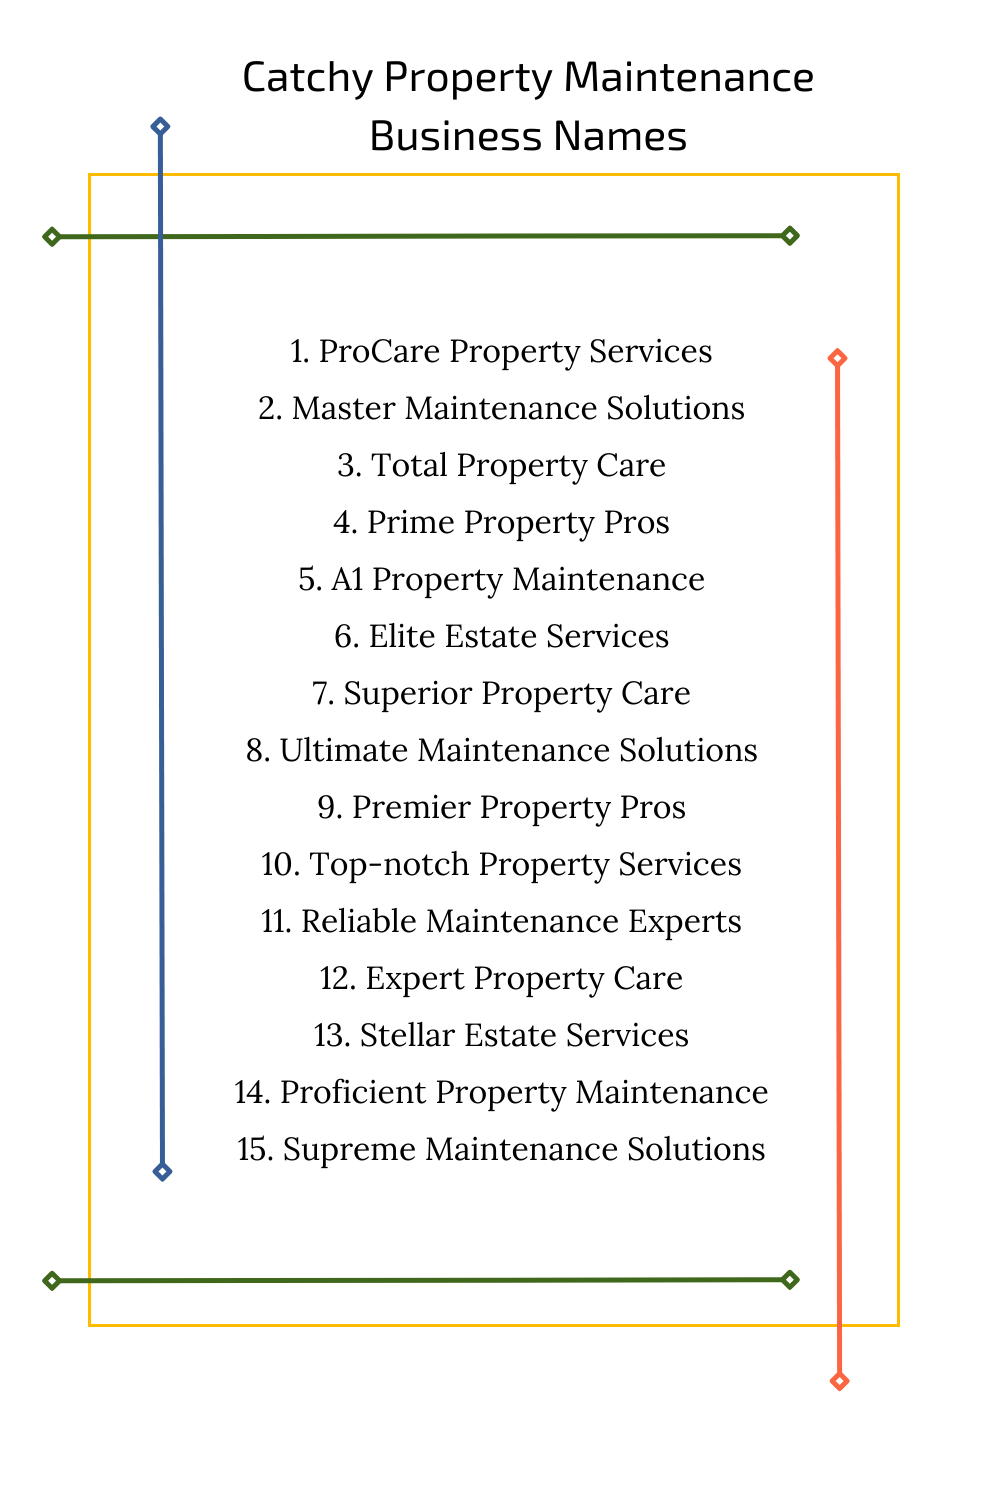 Catchy Property Maintenance Business Names